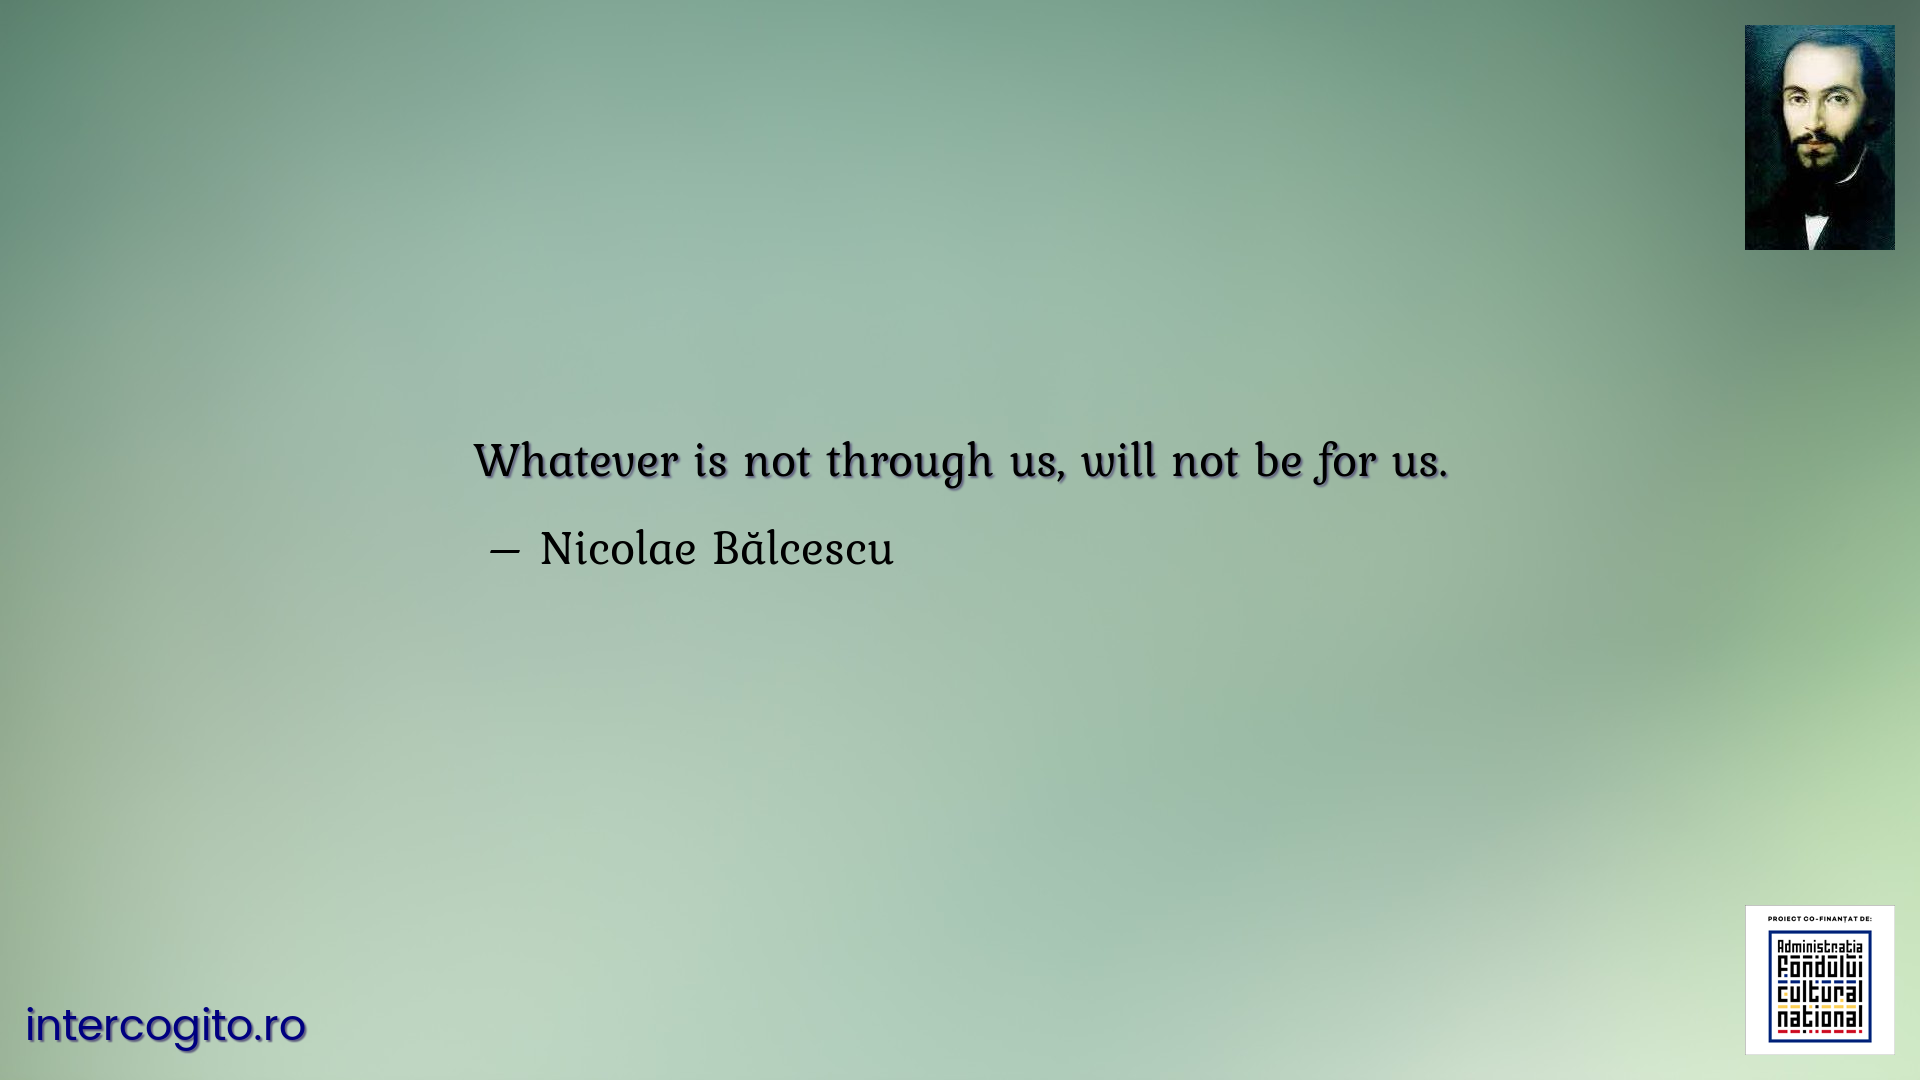 Whatever is not through us, will not be for us.